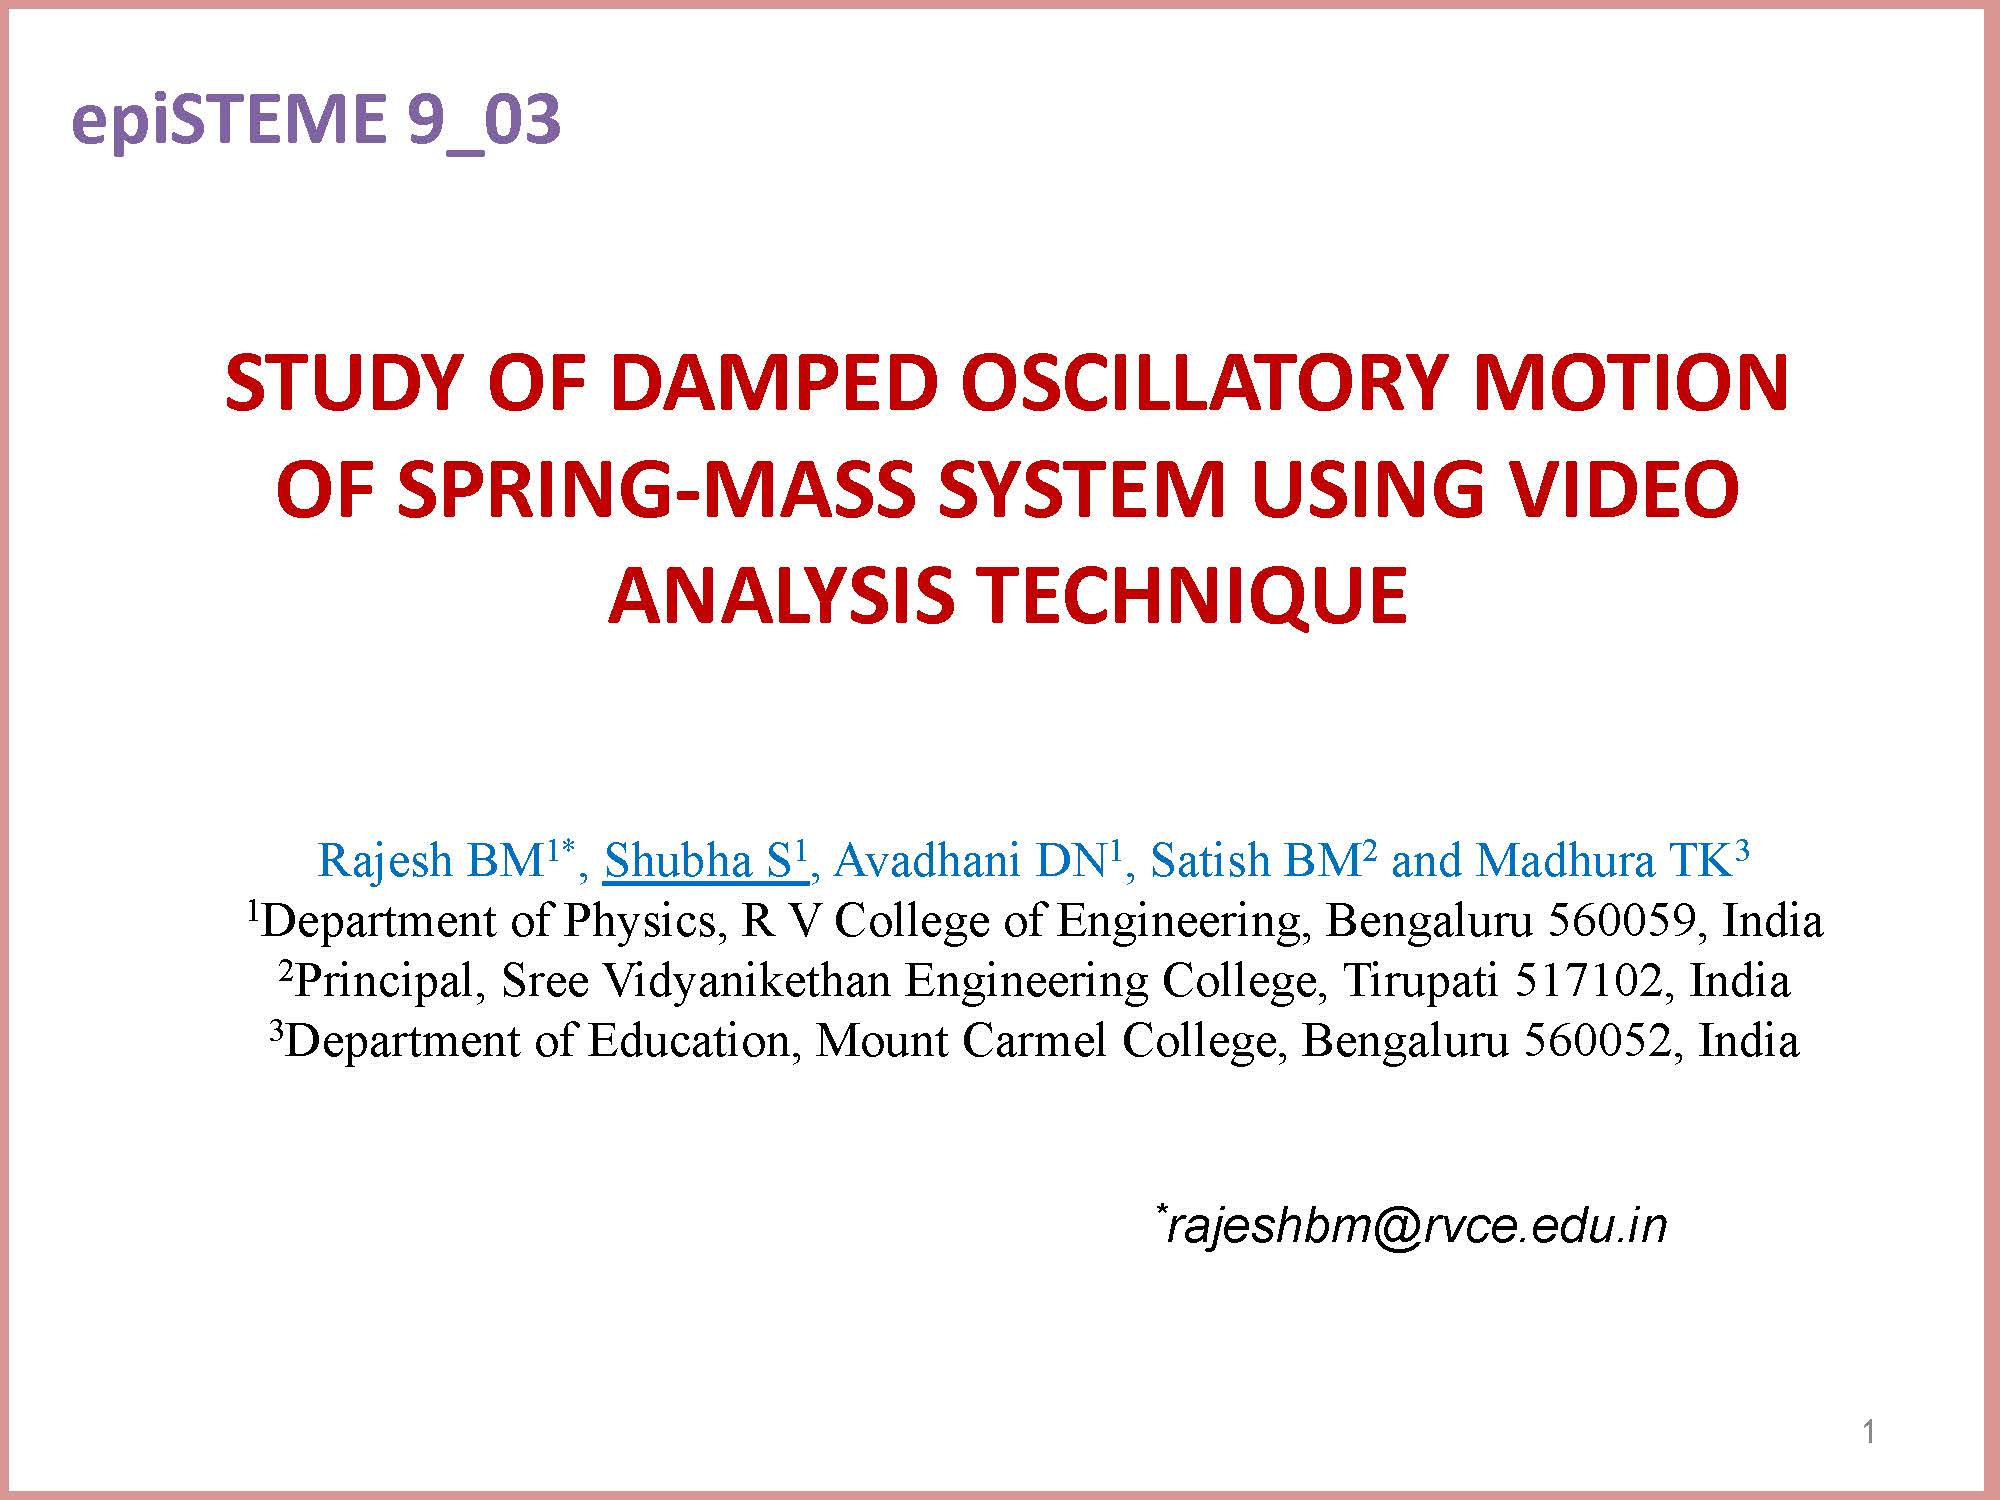 Study of damped oscillatory motion of spring-mass system using video analysis technique